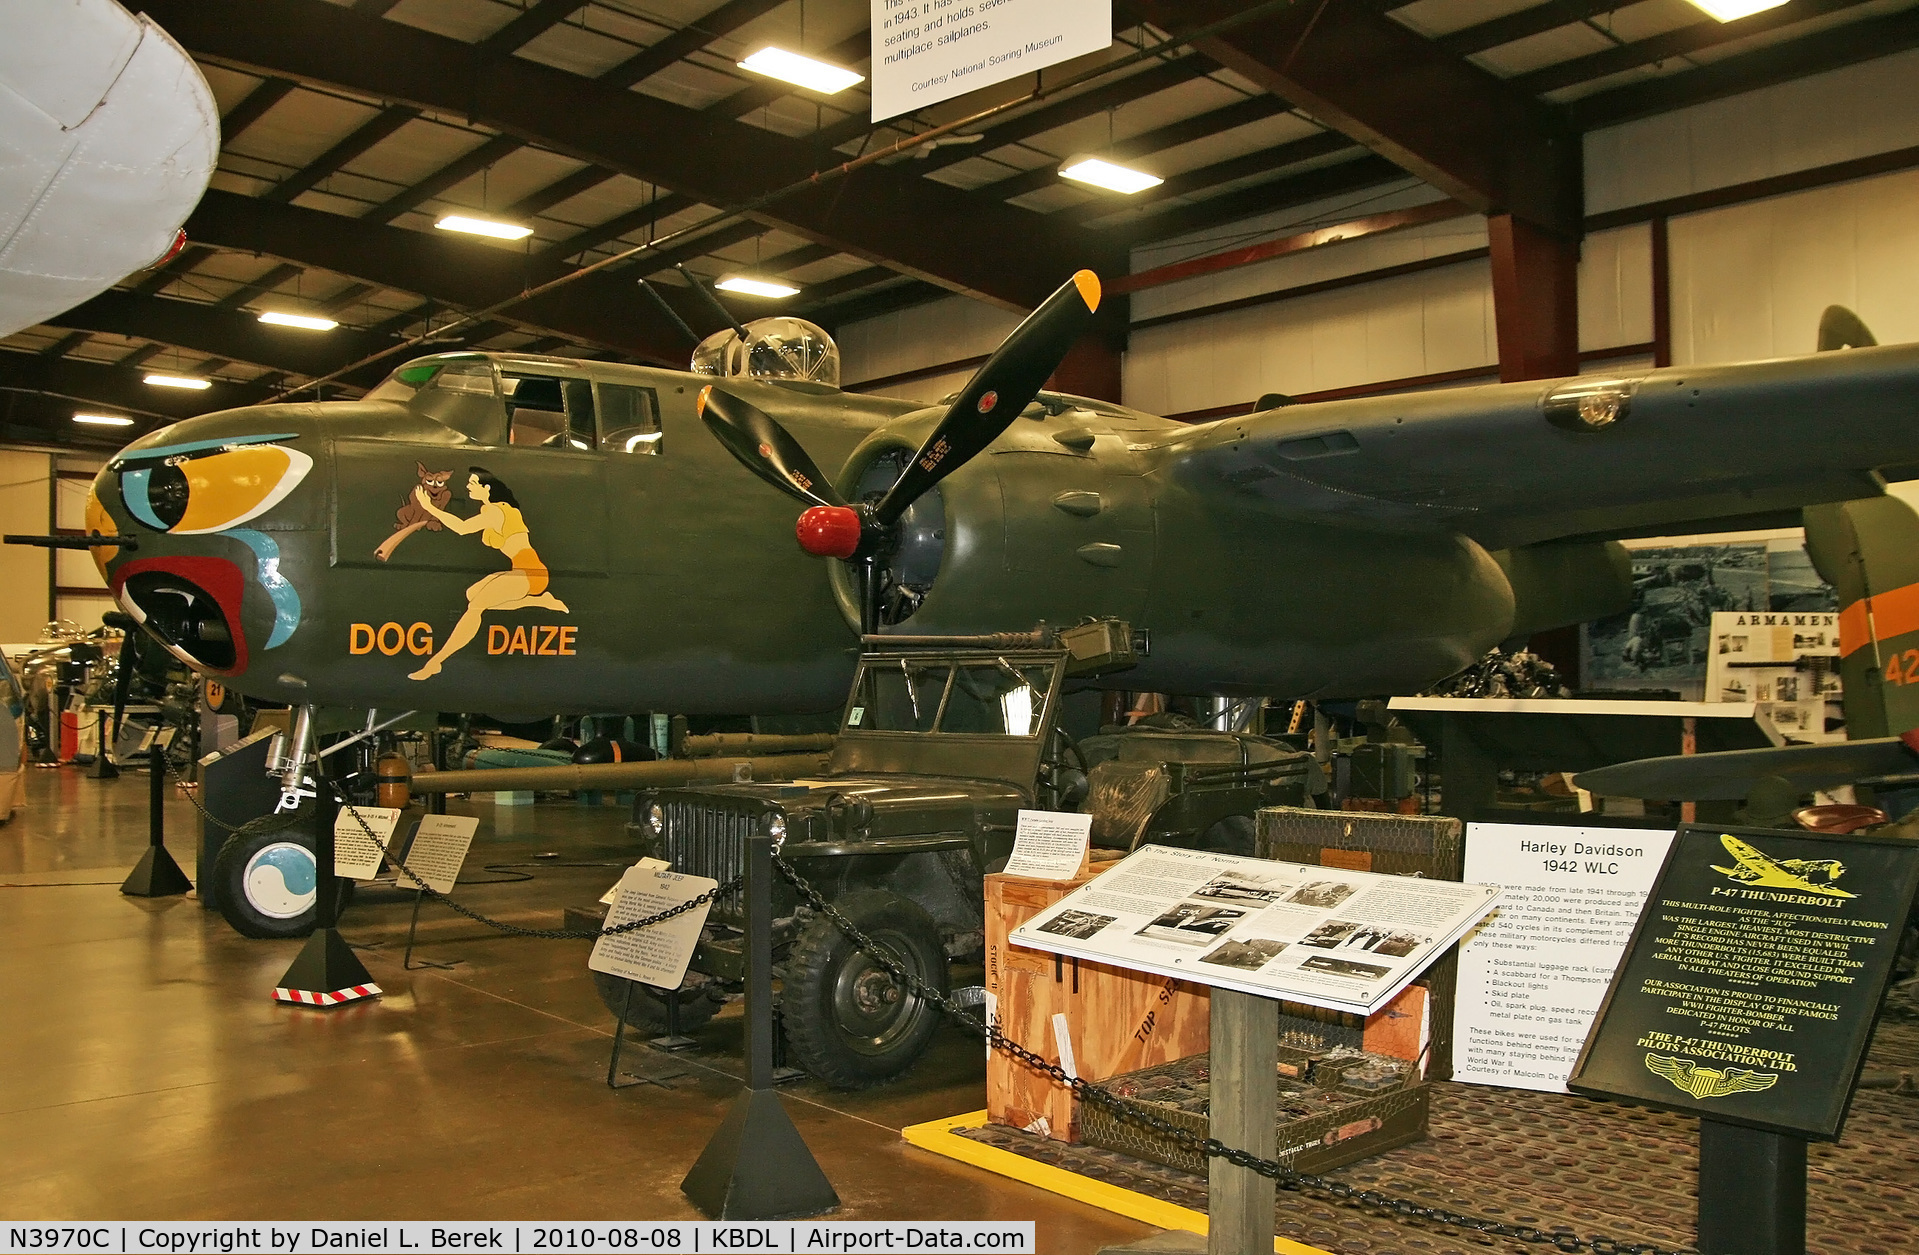 N3970C, 1953 North American B-25H Mitchell C/N 98-22000, This B-25 has been painstakingly preserved at the New England Air Museum.